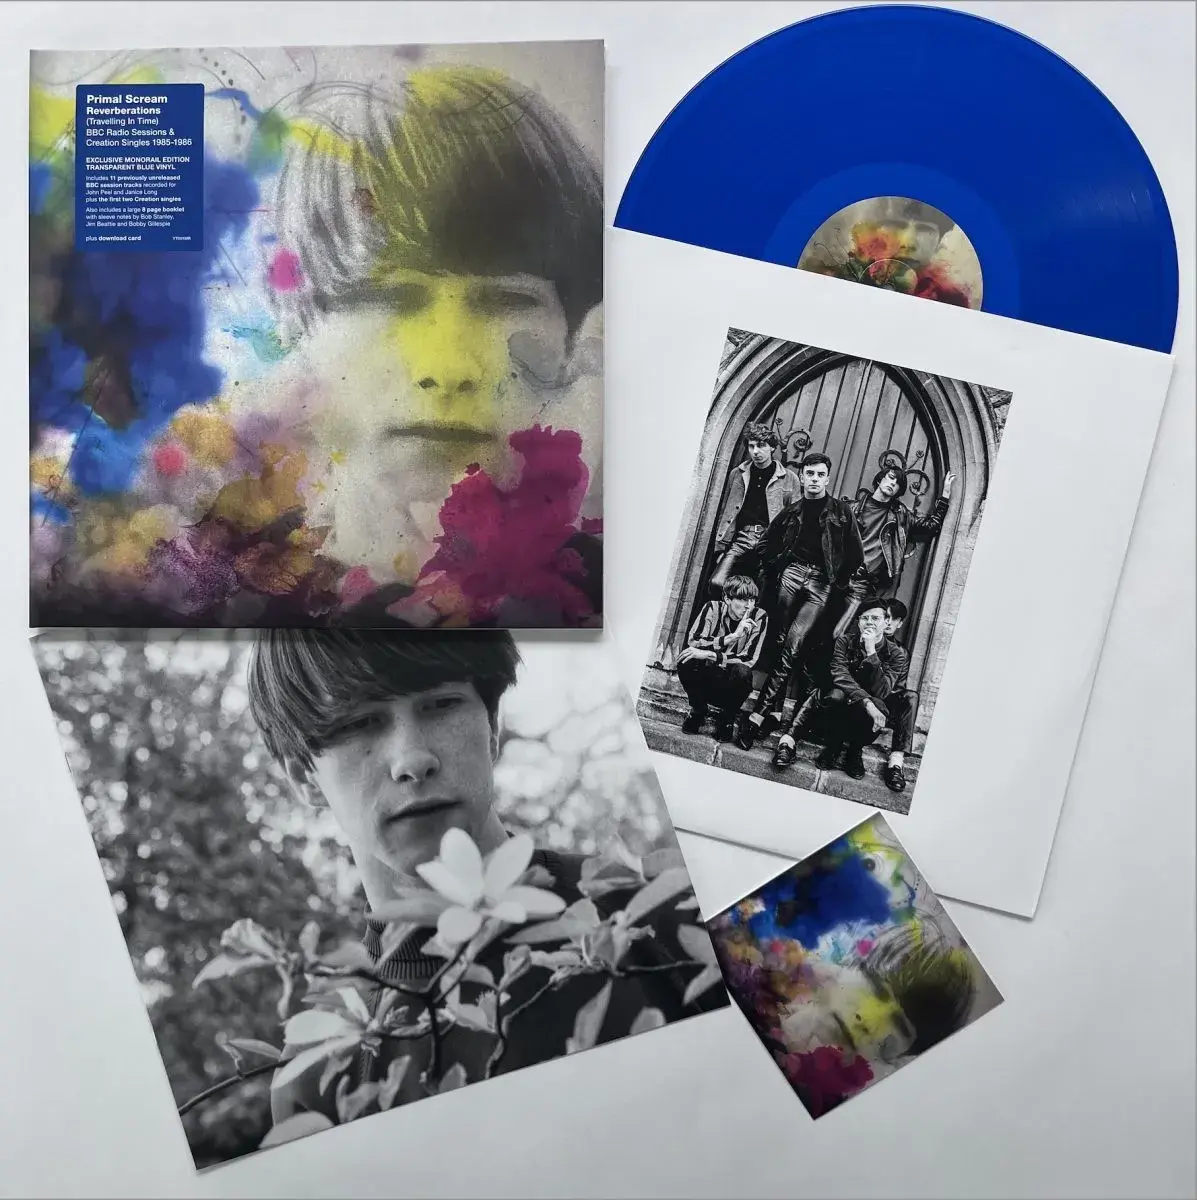 Young Tiki Primal Scream - Reverberations (Traveling In Time) (Blue Vinyl) SIGNED EDITION